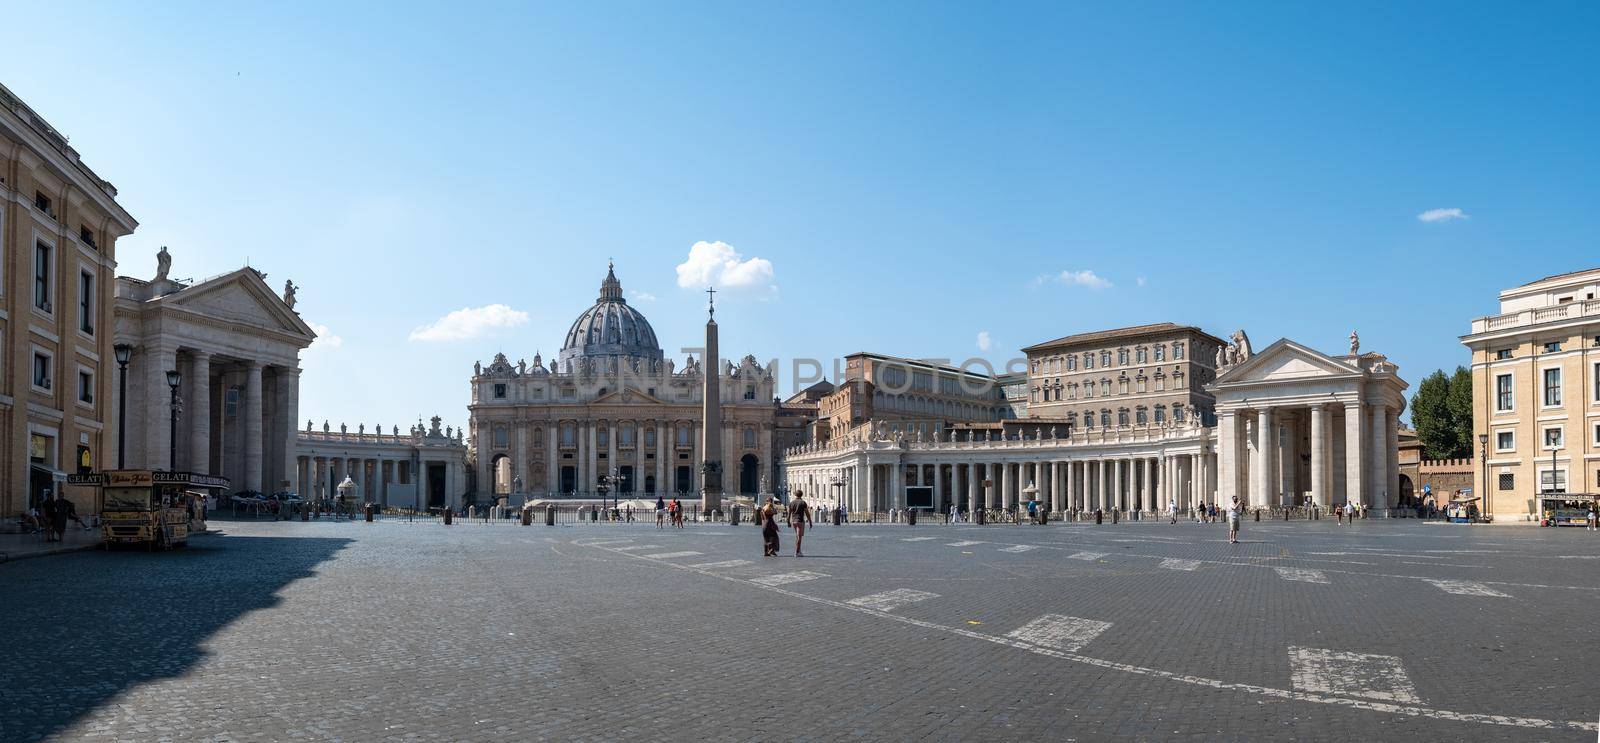 St. Peter's Basilica in the morning from Via della Conciliazione in Rome. Vatican City Rome Italy. Rome architecture and landmark. St. Peter's cathedral in Rome. Italian Renaissance church. by fokkebok